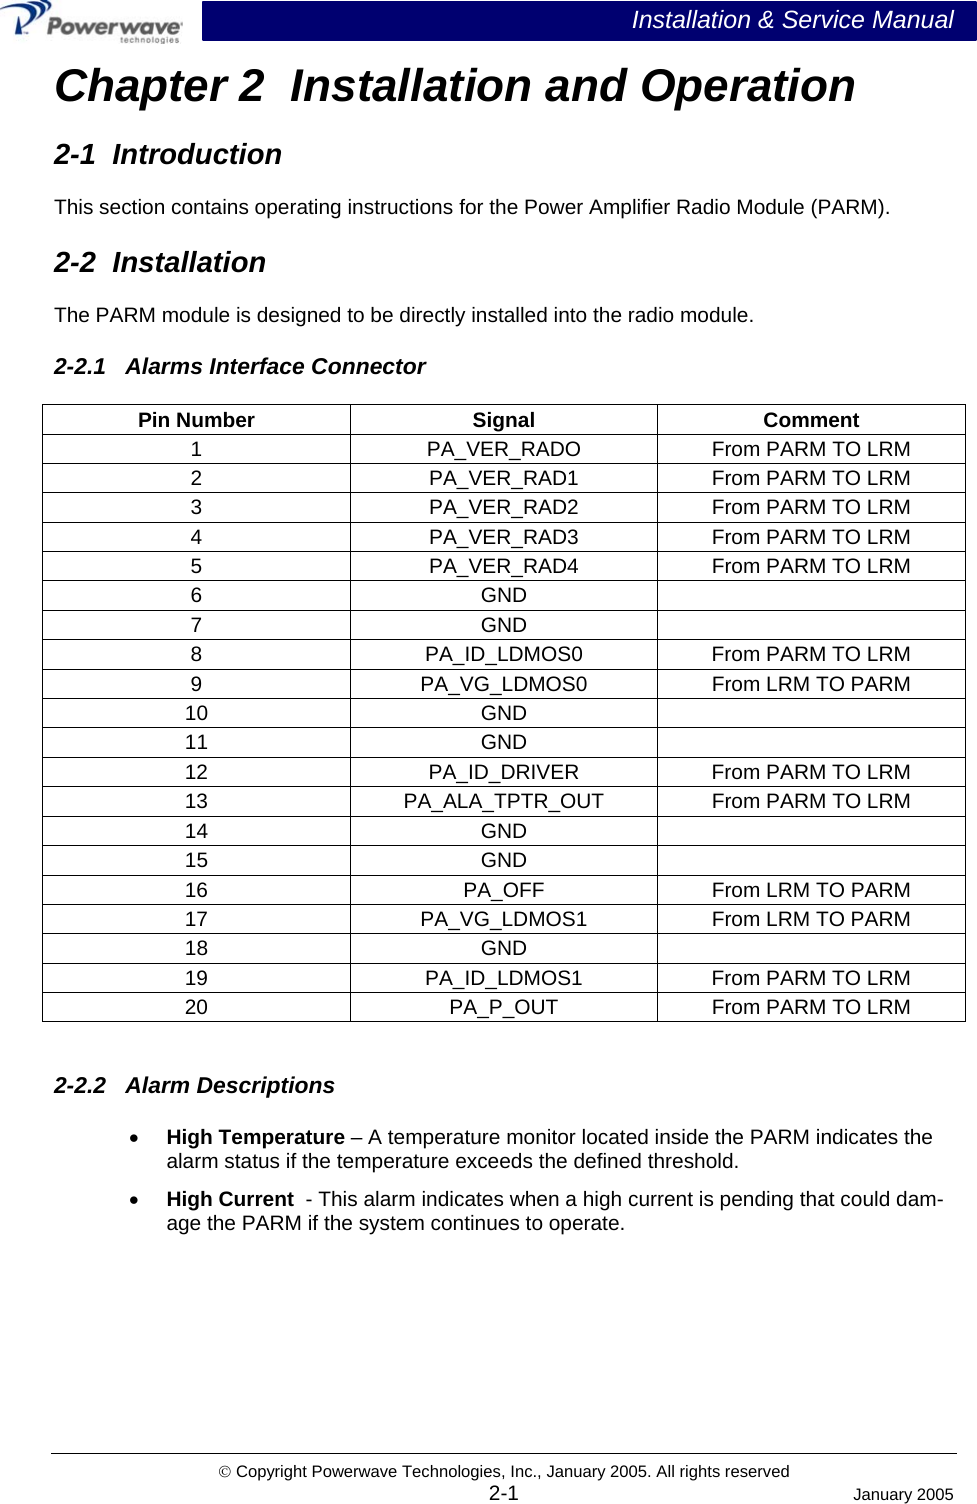  Installation &amp; Service Manual © Copyright Powerwave Technologies, Inc., January 2005. All rights reserved Chapter 2  Installation and Operation 2-1  Introduction This section contains operating instructions for the Power Amplifier Radio Module (PARM).  2-2  Installation The PARM module is designed to be directly installed into the radio module. 2-2.1   Alarms Interface Connector Pin Number  Signal  Comment 1  PA_VER_RADO  From PARM TO LRM 2 PA_VER_RAD1 From PARM TO LRM 3 PA_VER_RAD2 From PARM TO LRM 4 PA_VER_RAD3 From PARM TO LRM 5 PA_VER_RAD4 From PARM TO LRM 6 GND   7 GND   8  PA_ID_LDMOS0  From PARM TO LRM 9  PA_VG_LDMOS0  From LRM TO PARM 10 GND   11 GND   12  PA_ID_DRIVER  From PARM TO LRM 13  PA_ALA_TPTR_OUT  From PARM TO LRM 14 GND   15 GND   16  PA_OFF  From LRM TO PARM 17 PA_VG_LDMOS1 From LRM TO PARM 18 GND  19  PA_ID_LDMOS1  From PARM TO LRM 20  PA_P_OUT  From PARM TO LRM  2-2.2   Alarm Descriptions •  High Temperature – A temperature monitor located inside the PARM indicates the alarm status if the temperature exceeds the defined threshold.  •  High Current  - This alarm indicates when a high current is pending that could dam-age the PARM if the system continues to operate.     2-1  January 2005 